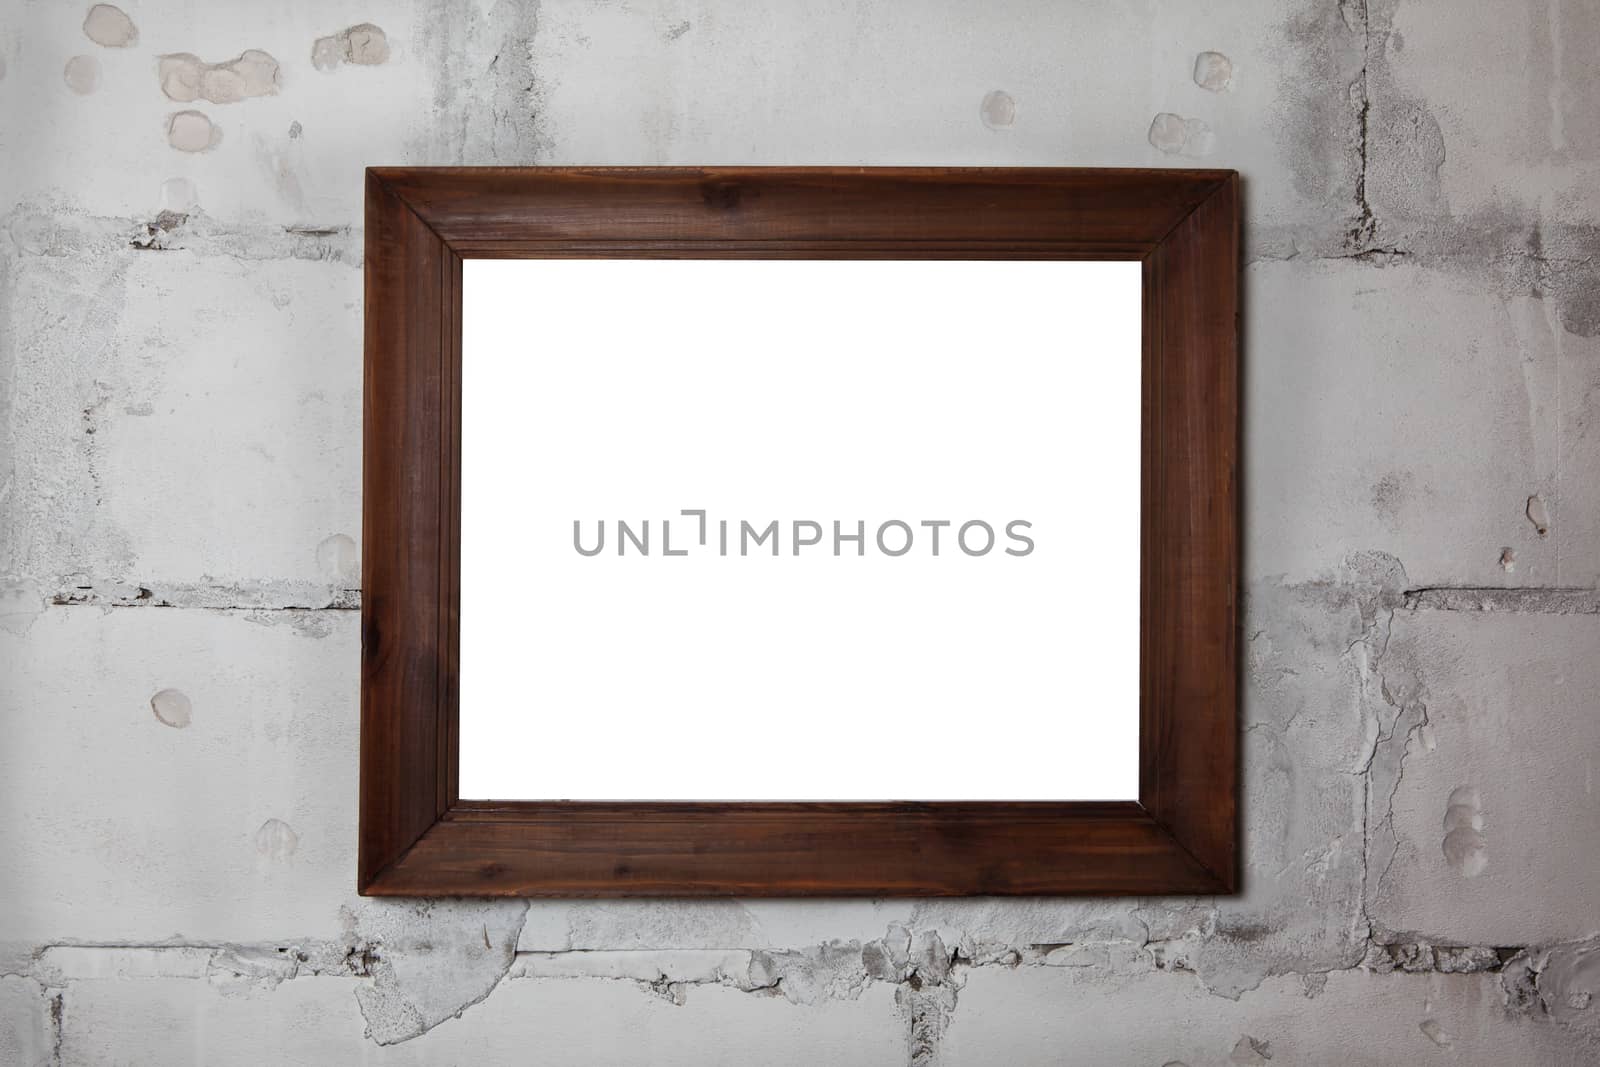 room interior vintage wall, wood floor and white blank placard background